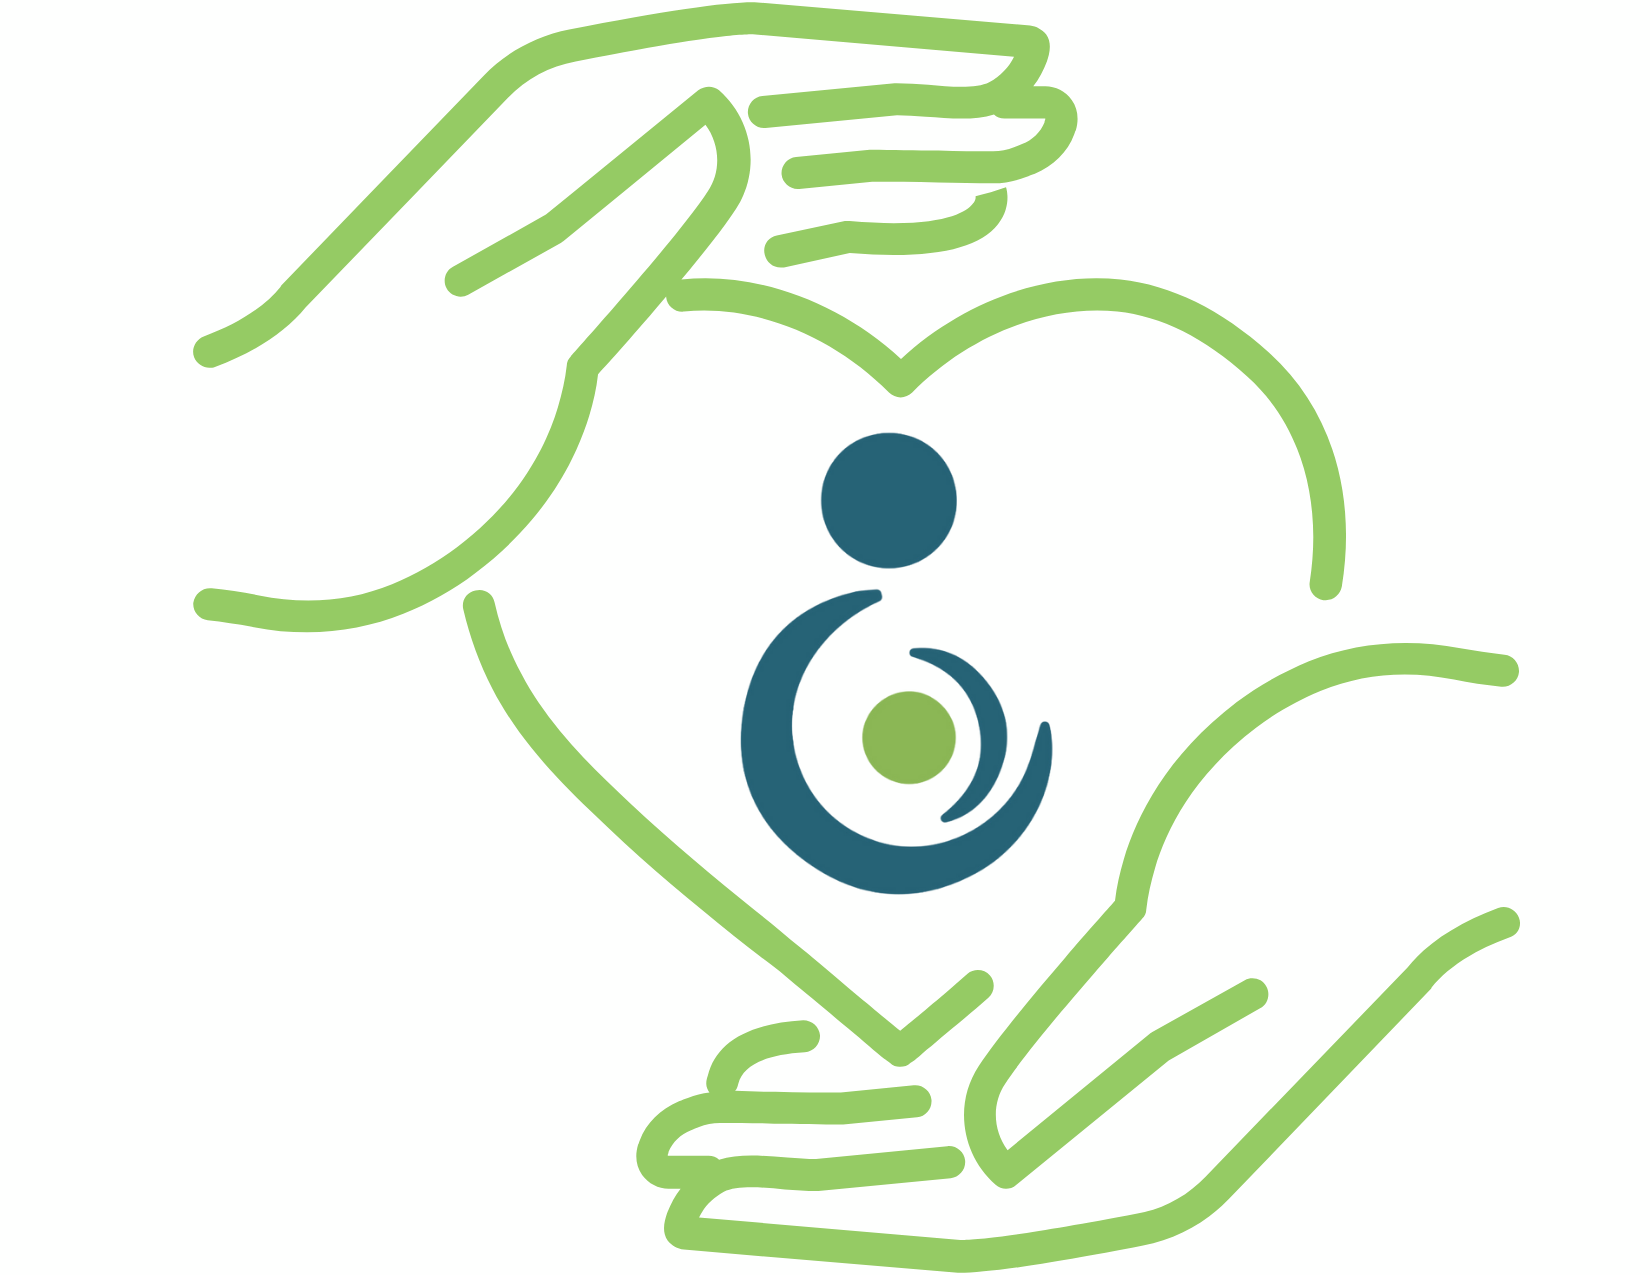 illustrated image of an outline of 2 hands holding a heart with a pregnancy hub logo in the the middle of the heart.